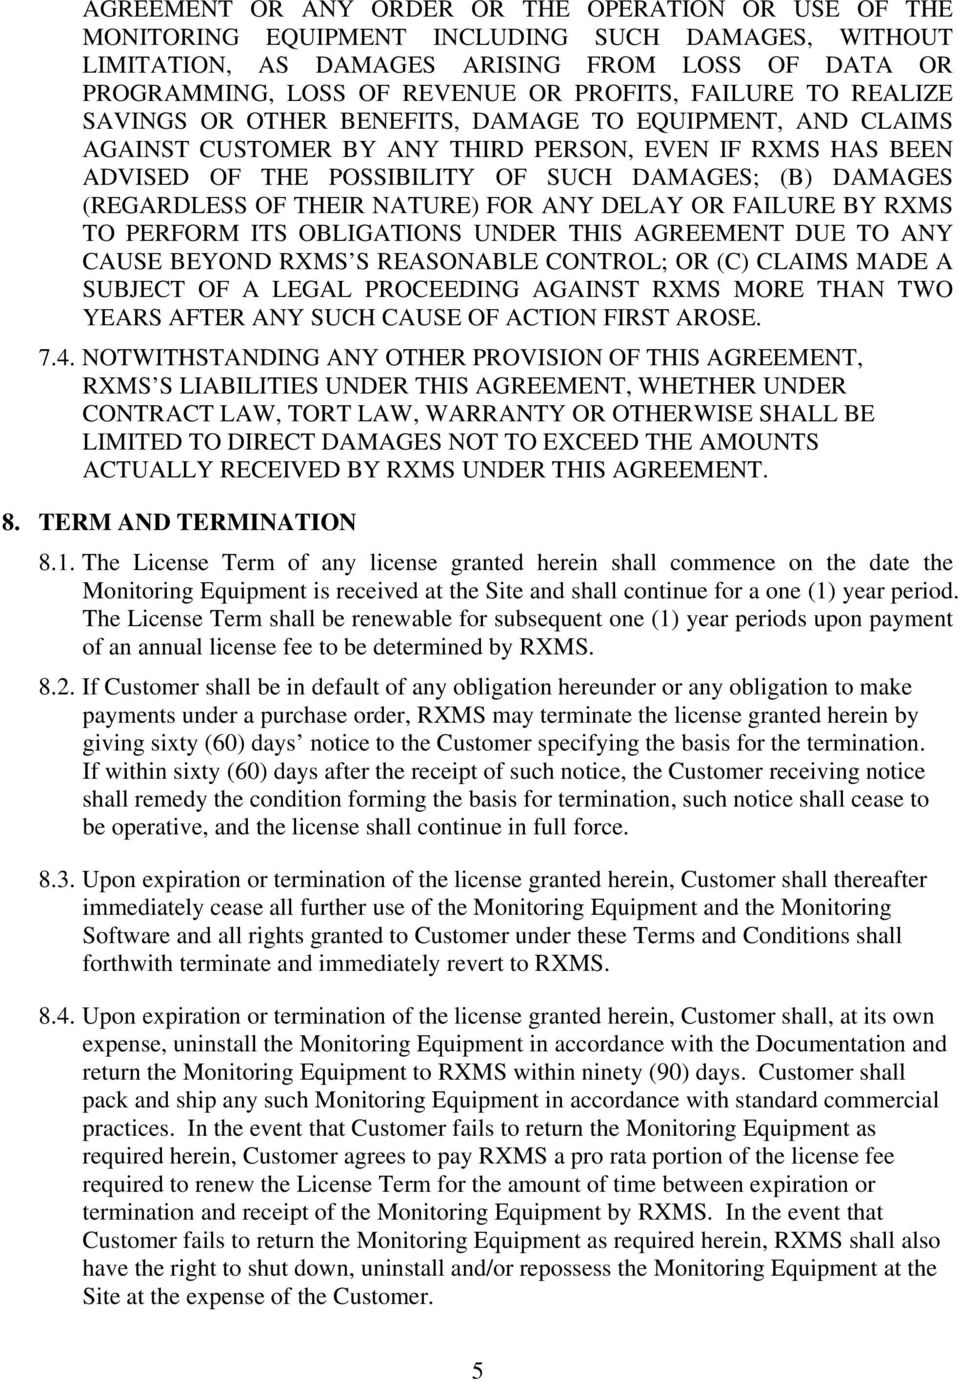 (REGARDLESS OF THEIR NATURE) FOR ANY DELAY OR FAILURE BY RXMS TO PERFORM ITS OBLIGATIONS UNDER THIS AGREEMENT DUE TO ANY CAUSE BEYOND RXMS S REASONABLE CONTROL; OR (C) CLAIMS MADE A SUBJECT OF A